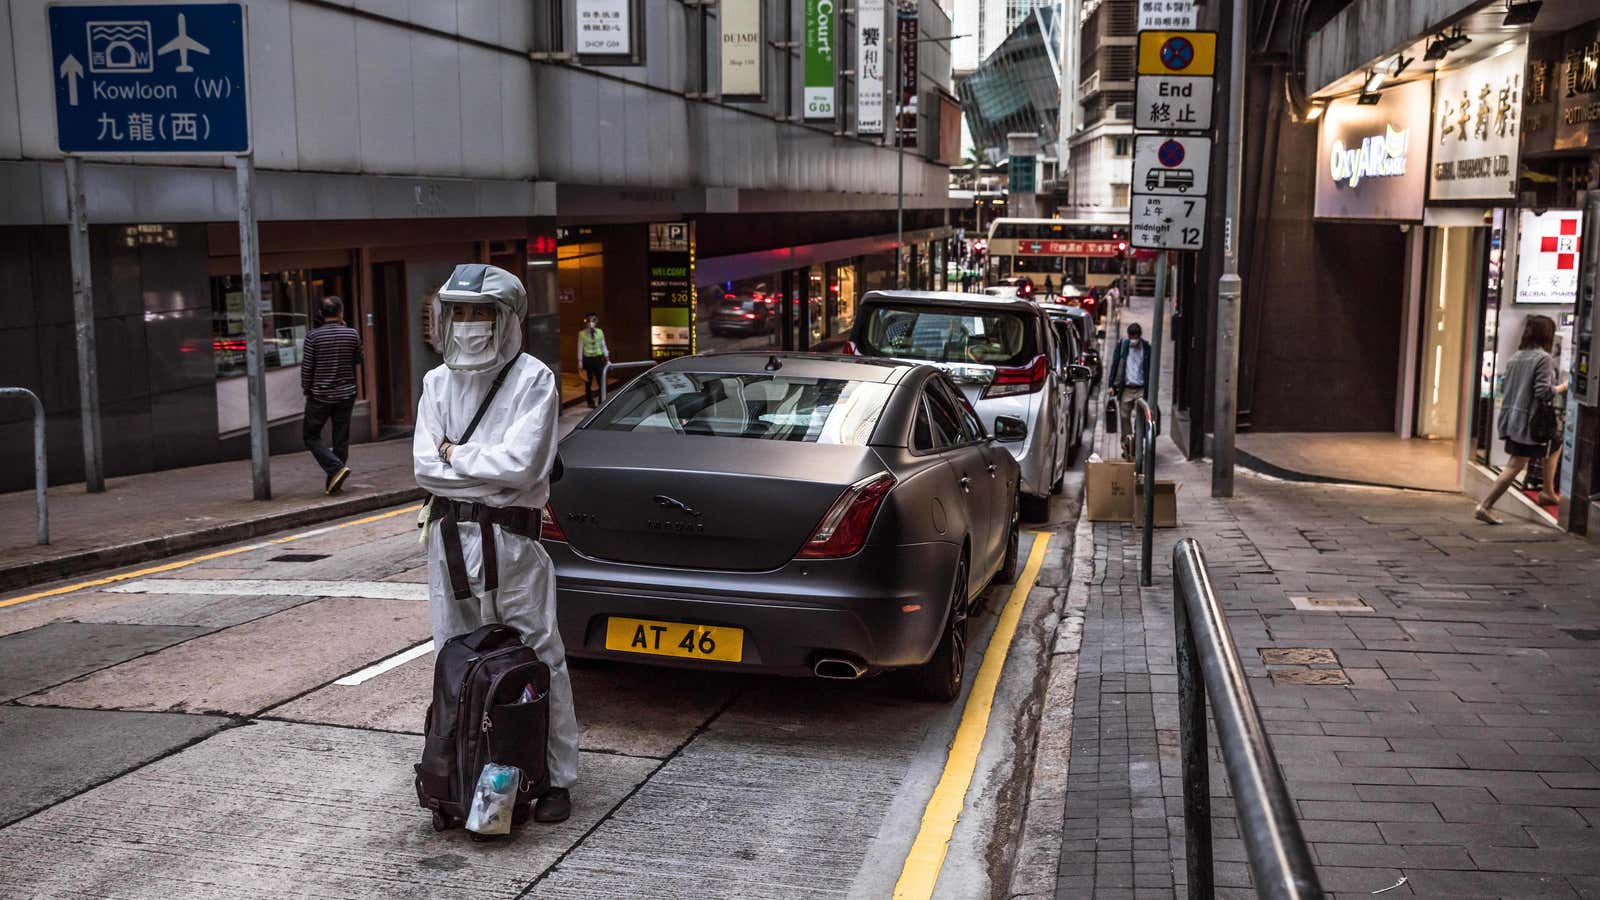 A man wearing personal protective equipment (PPE) stands on a street in Hong Kong.